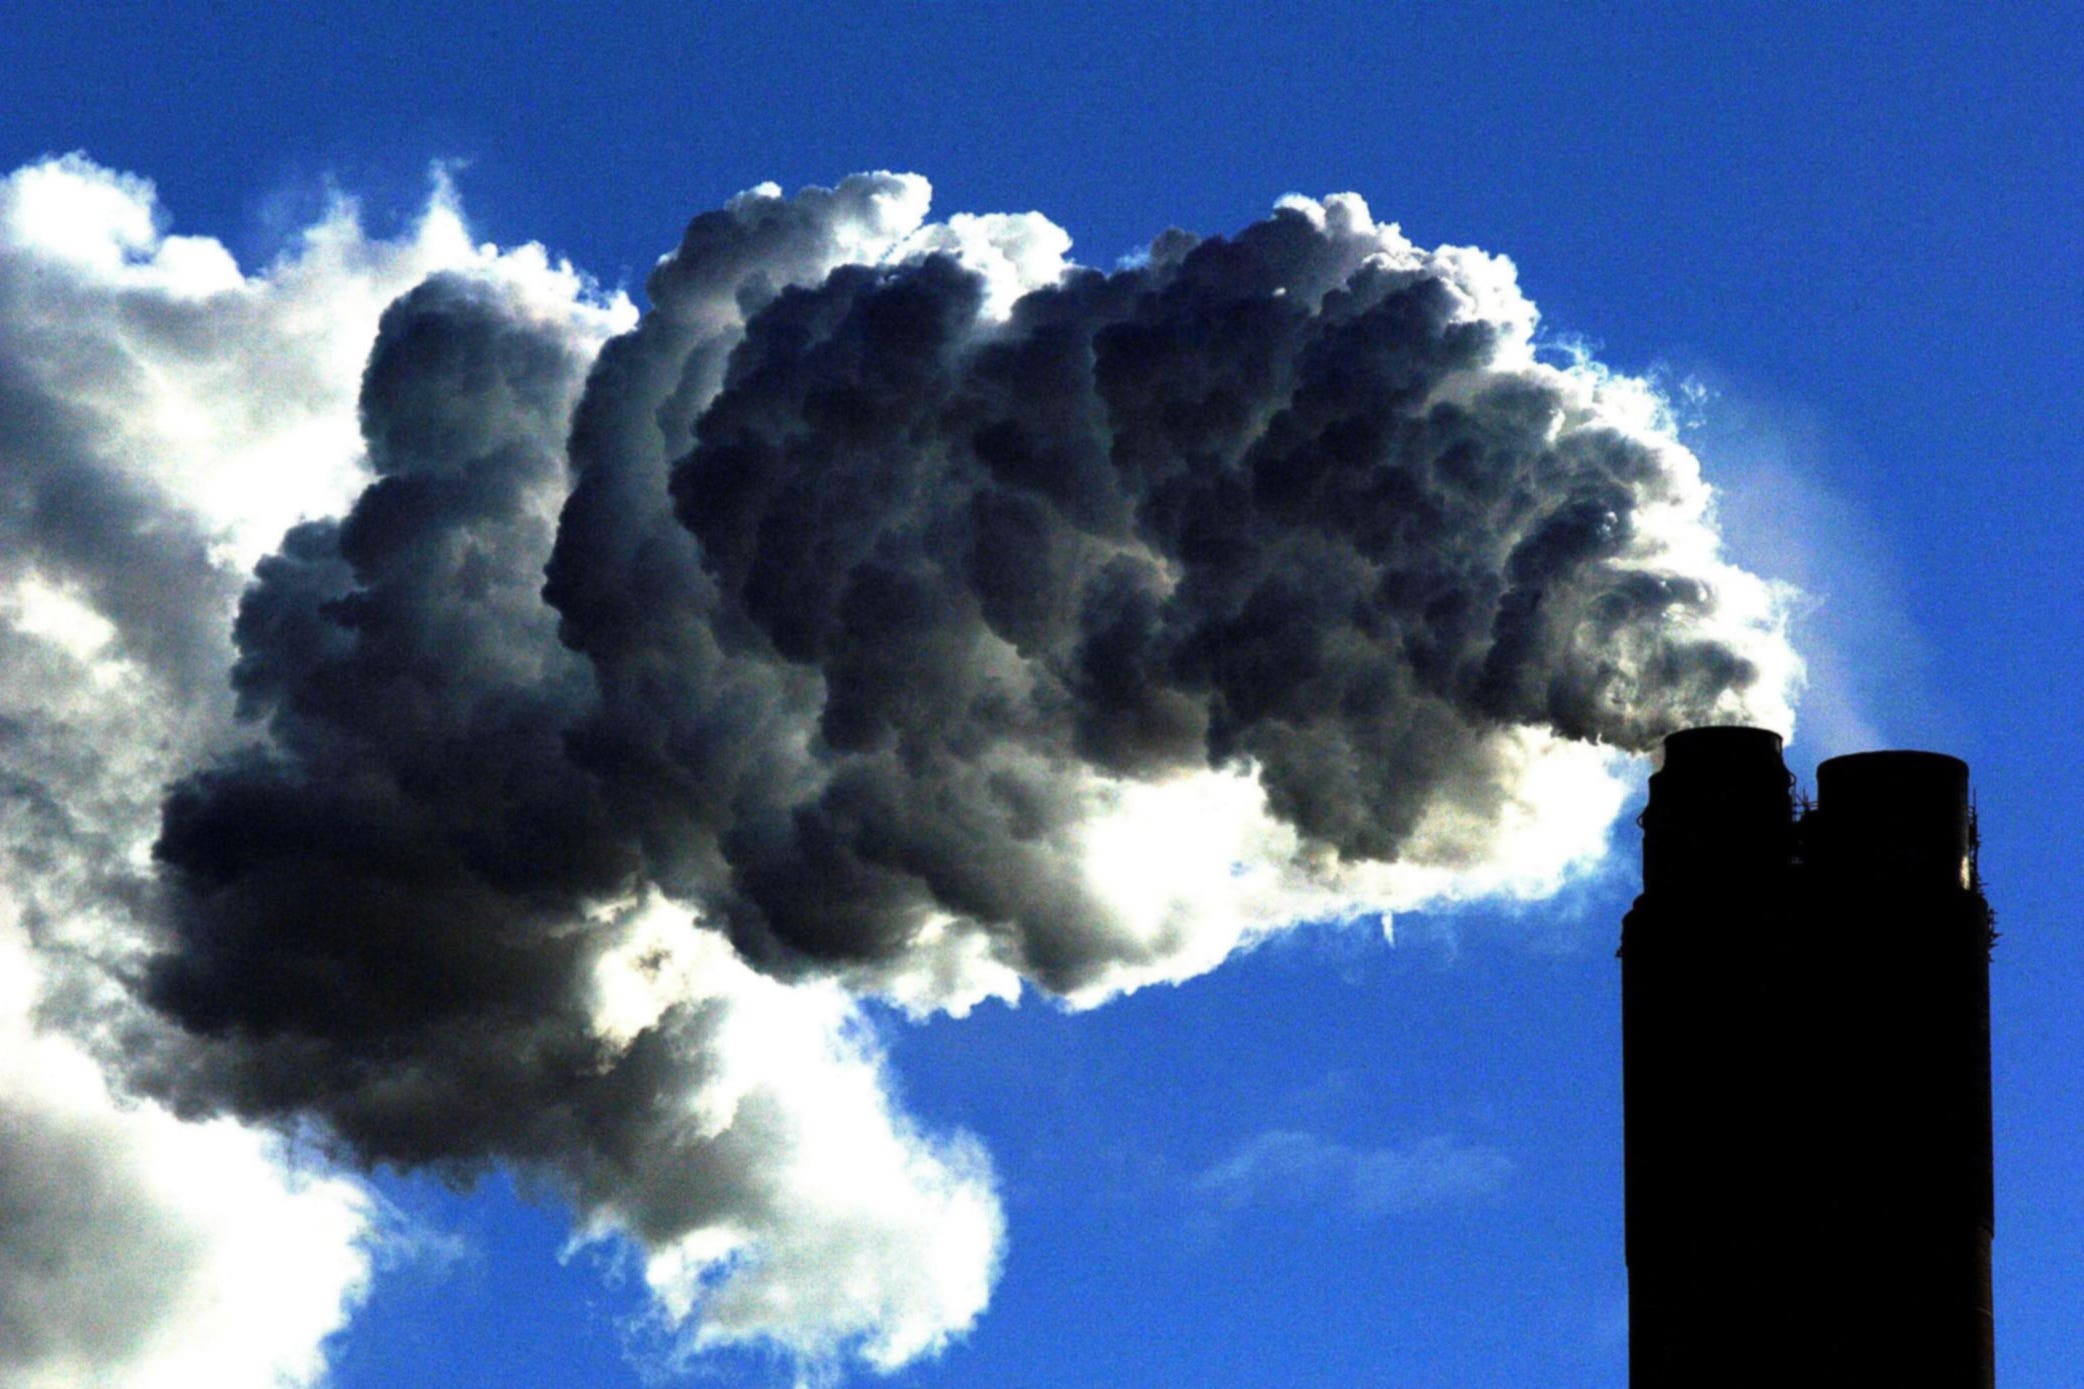 Energy minister Graham said the world is ‘badly off track’ to meet carbon emissions targets (John Giles/PA)